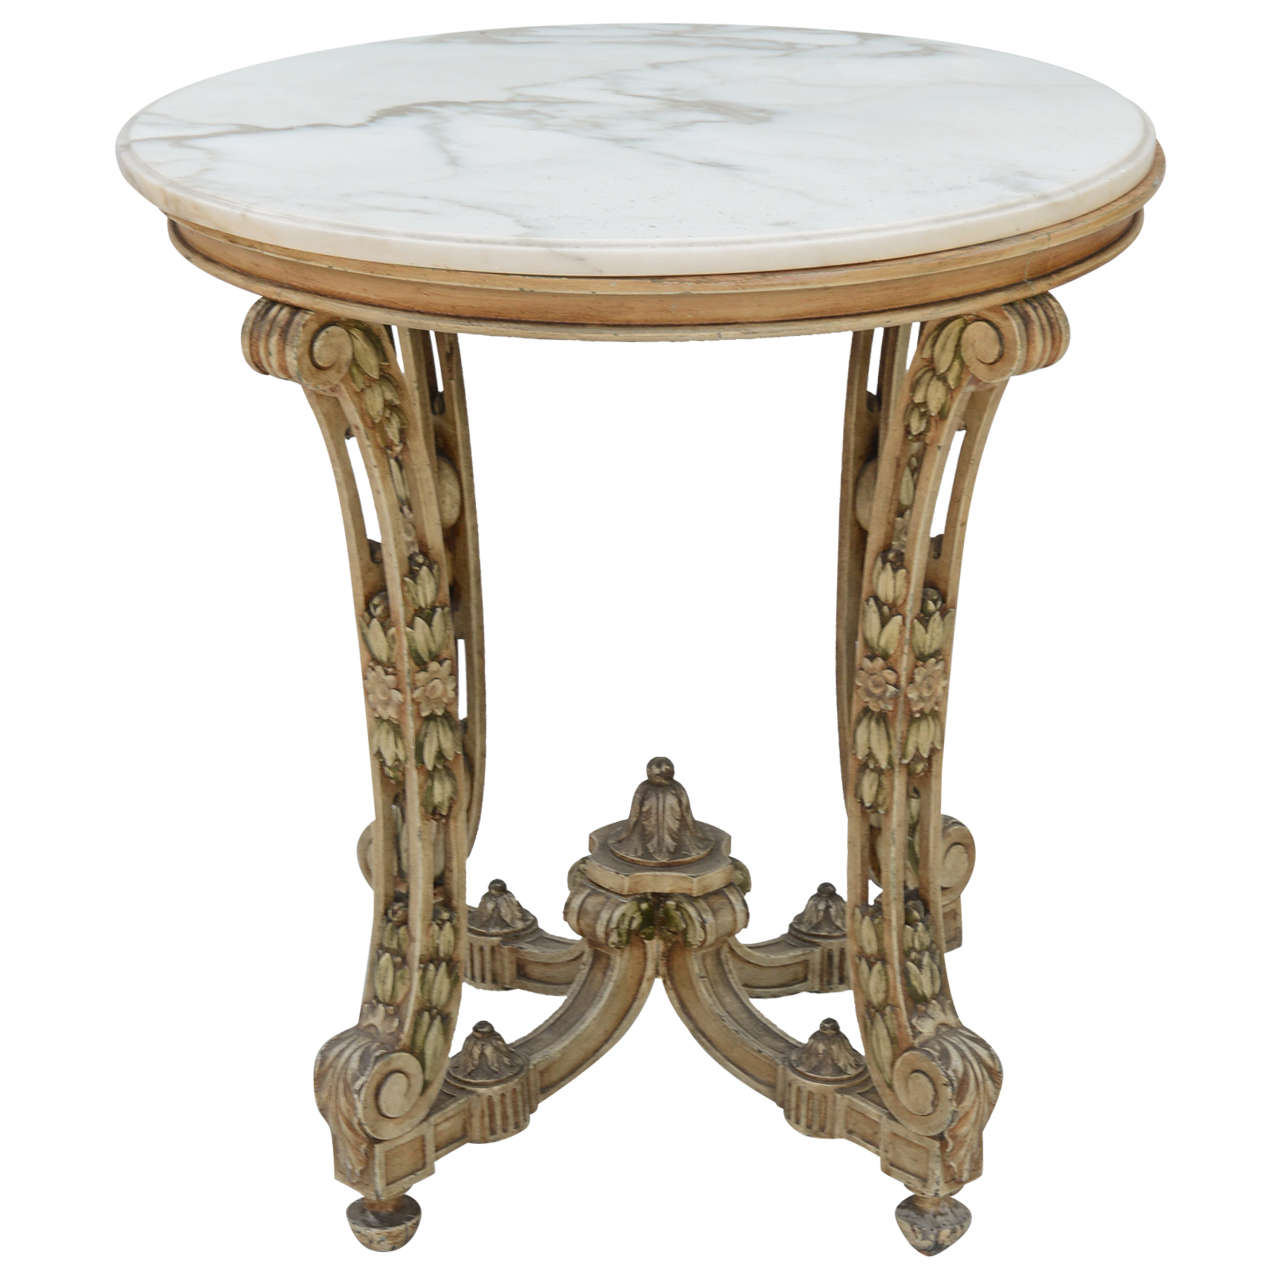 Occasional Table with Round Marble Top on Pierced Painted Base c. 1900